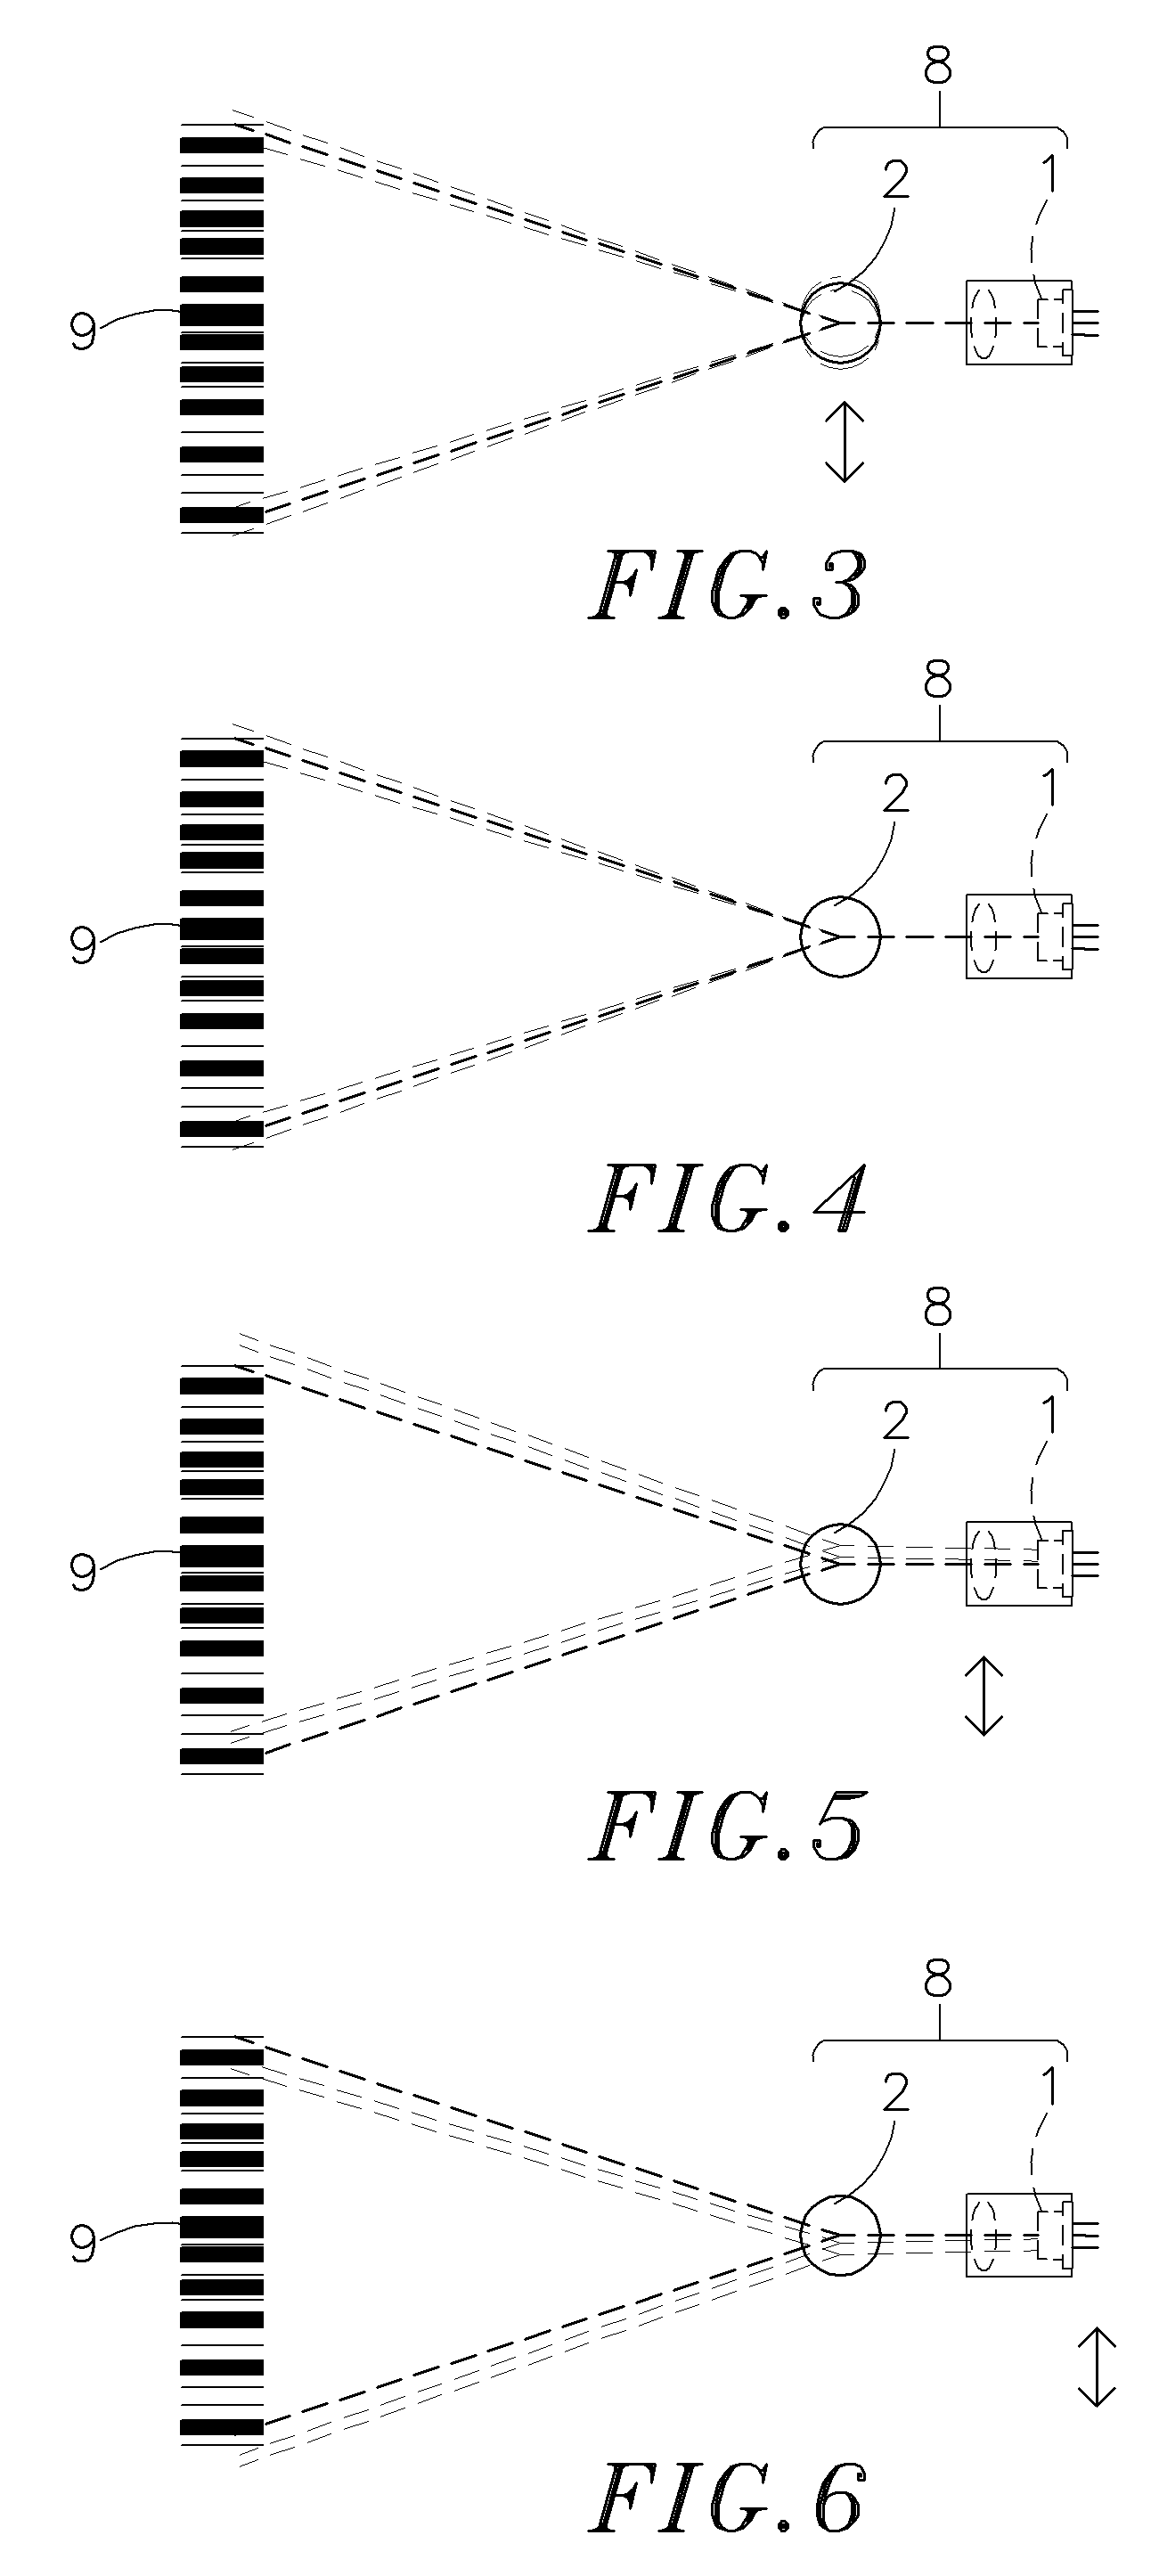 Optical system for barcode scanner